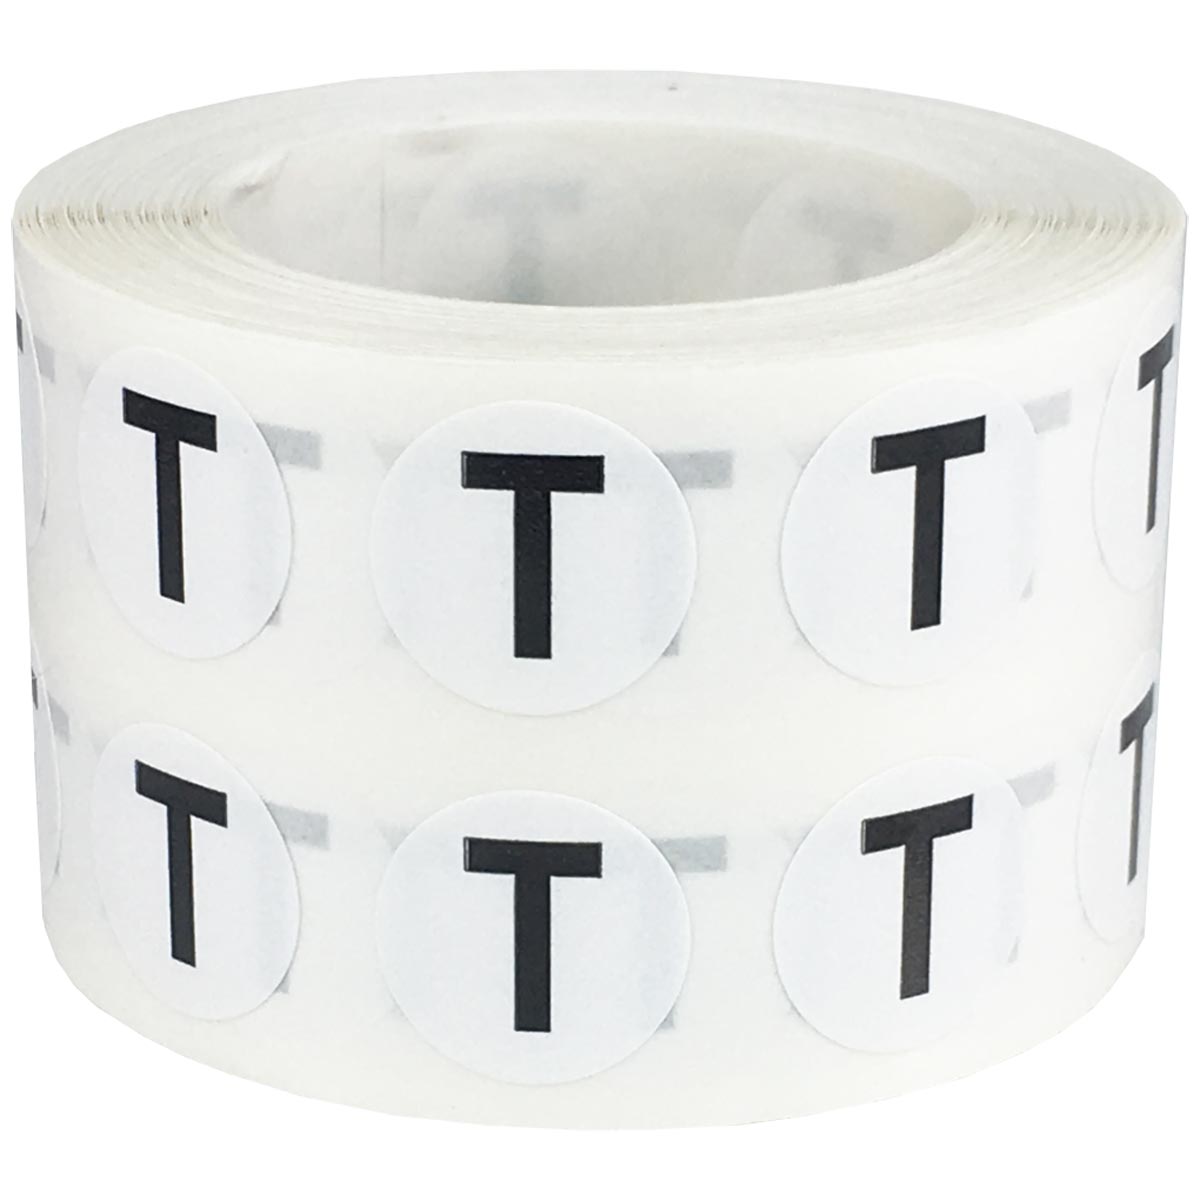 Small Letter T Stickers 1/2 Round